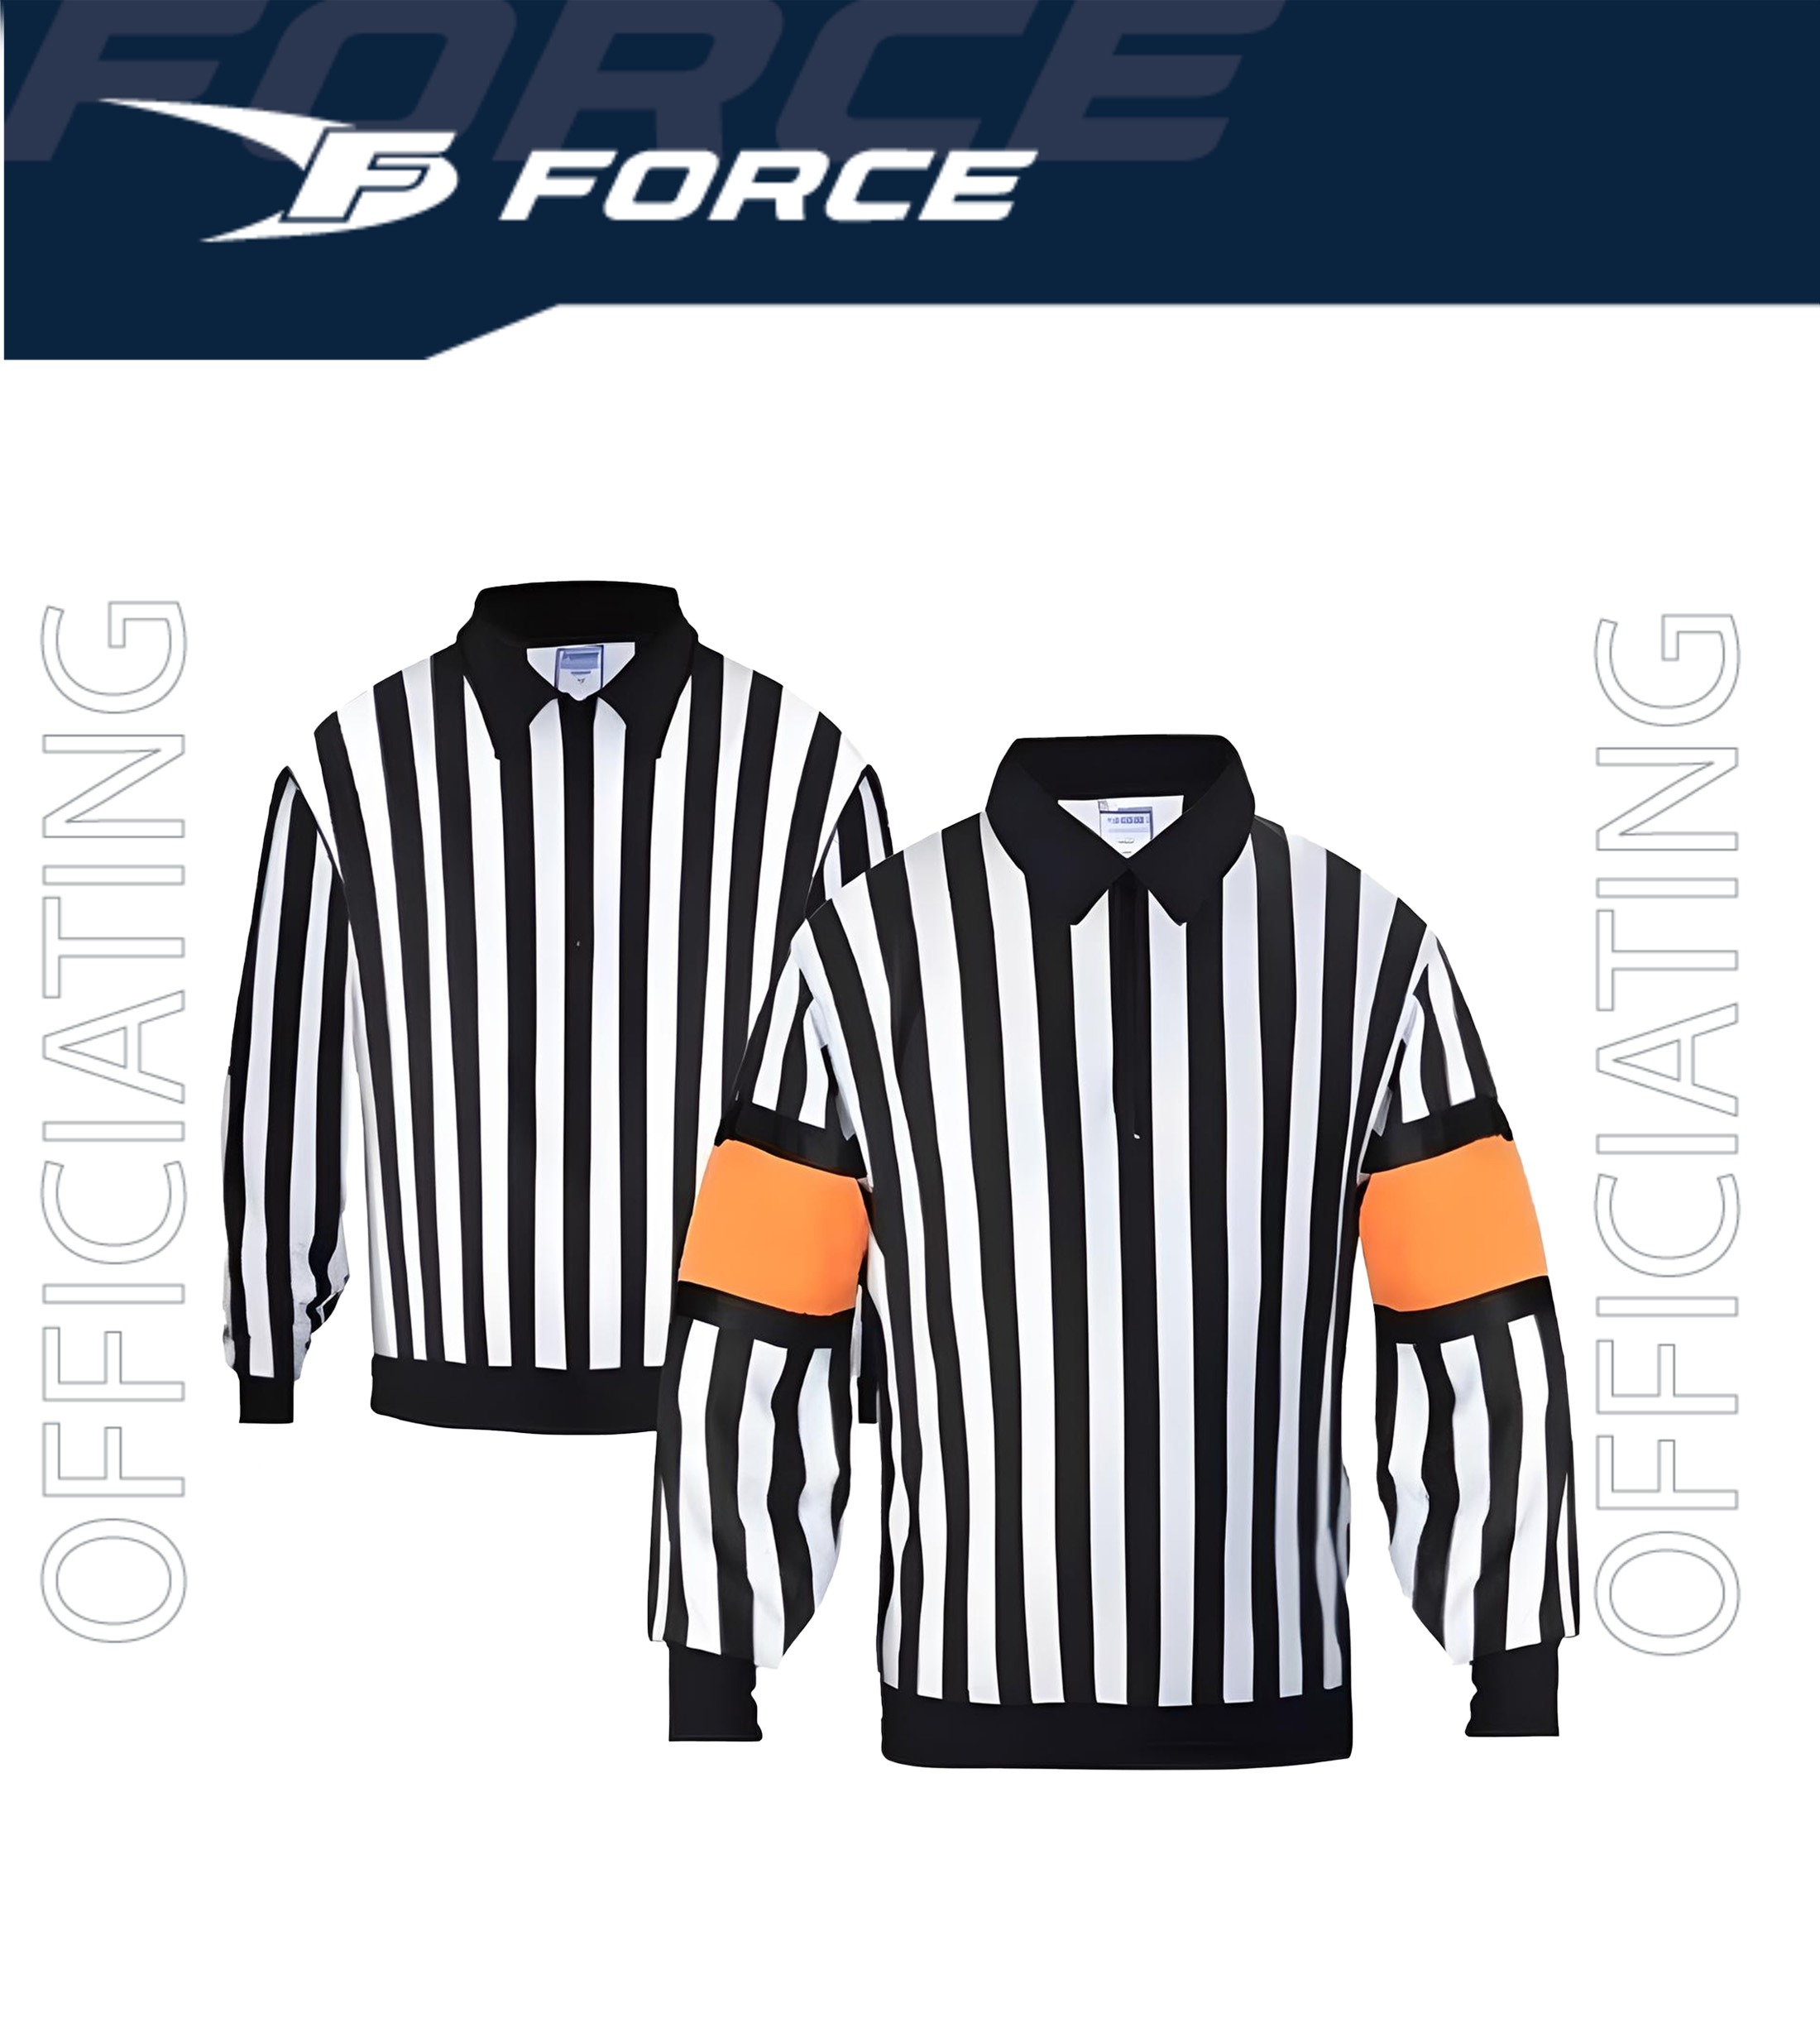 FORCE PRO Officiating Jersey Linesman – Officials Equipment